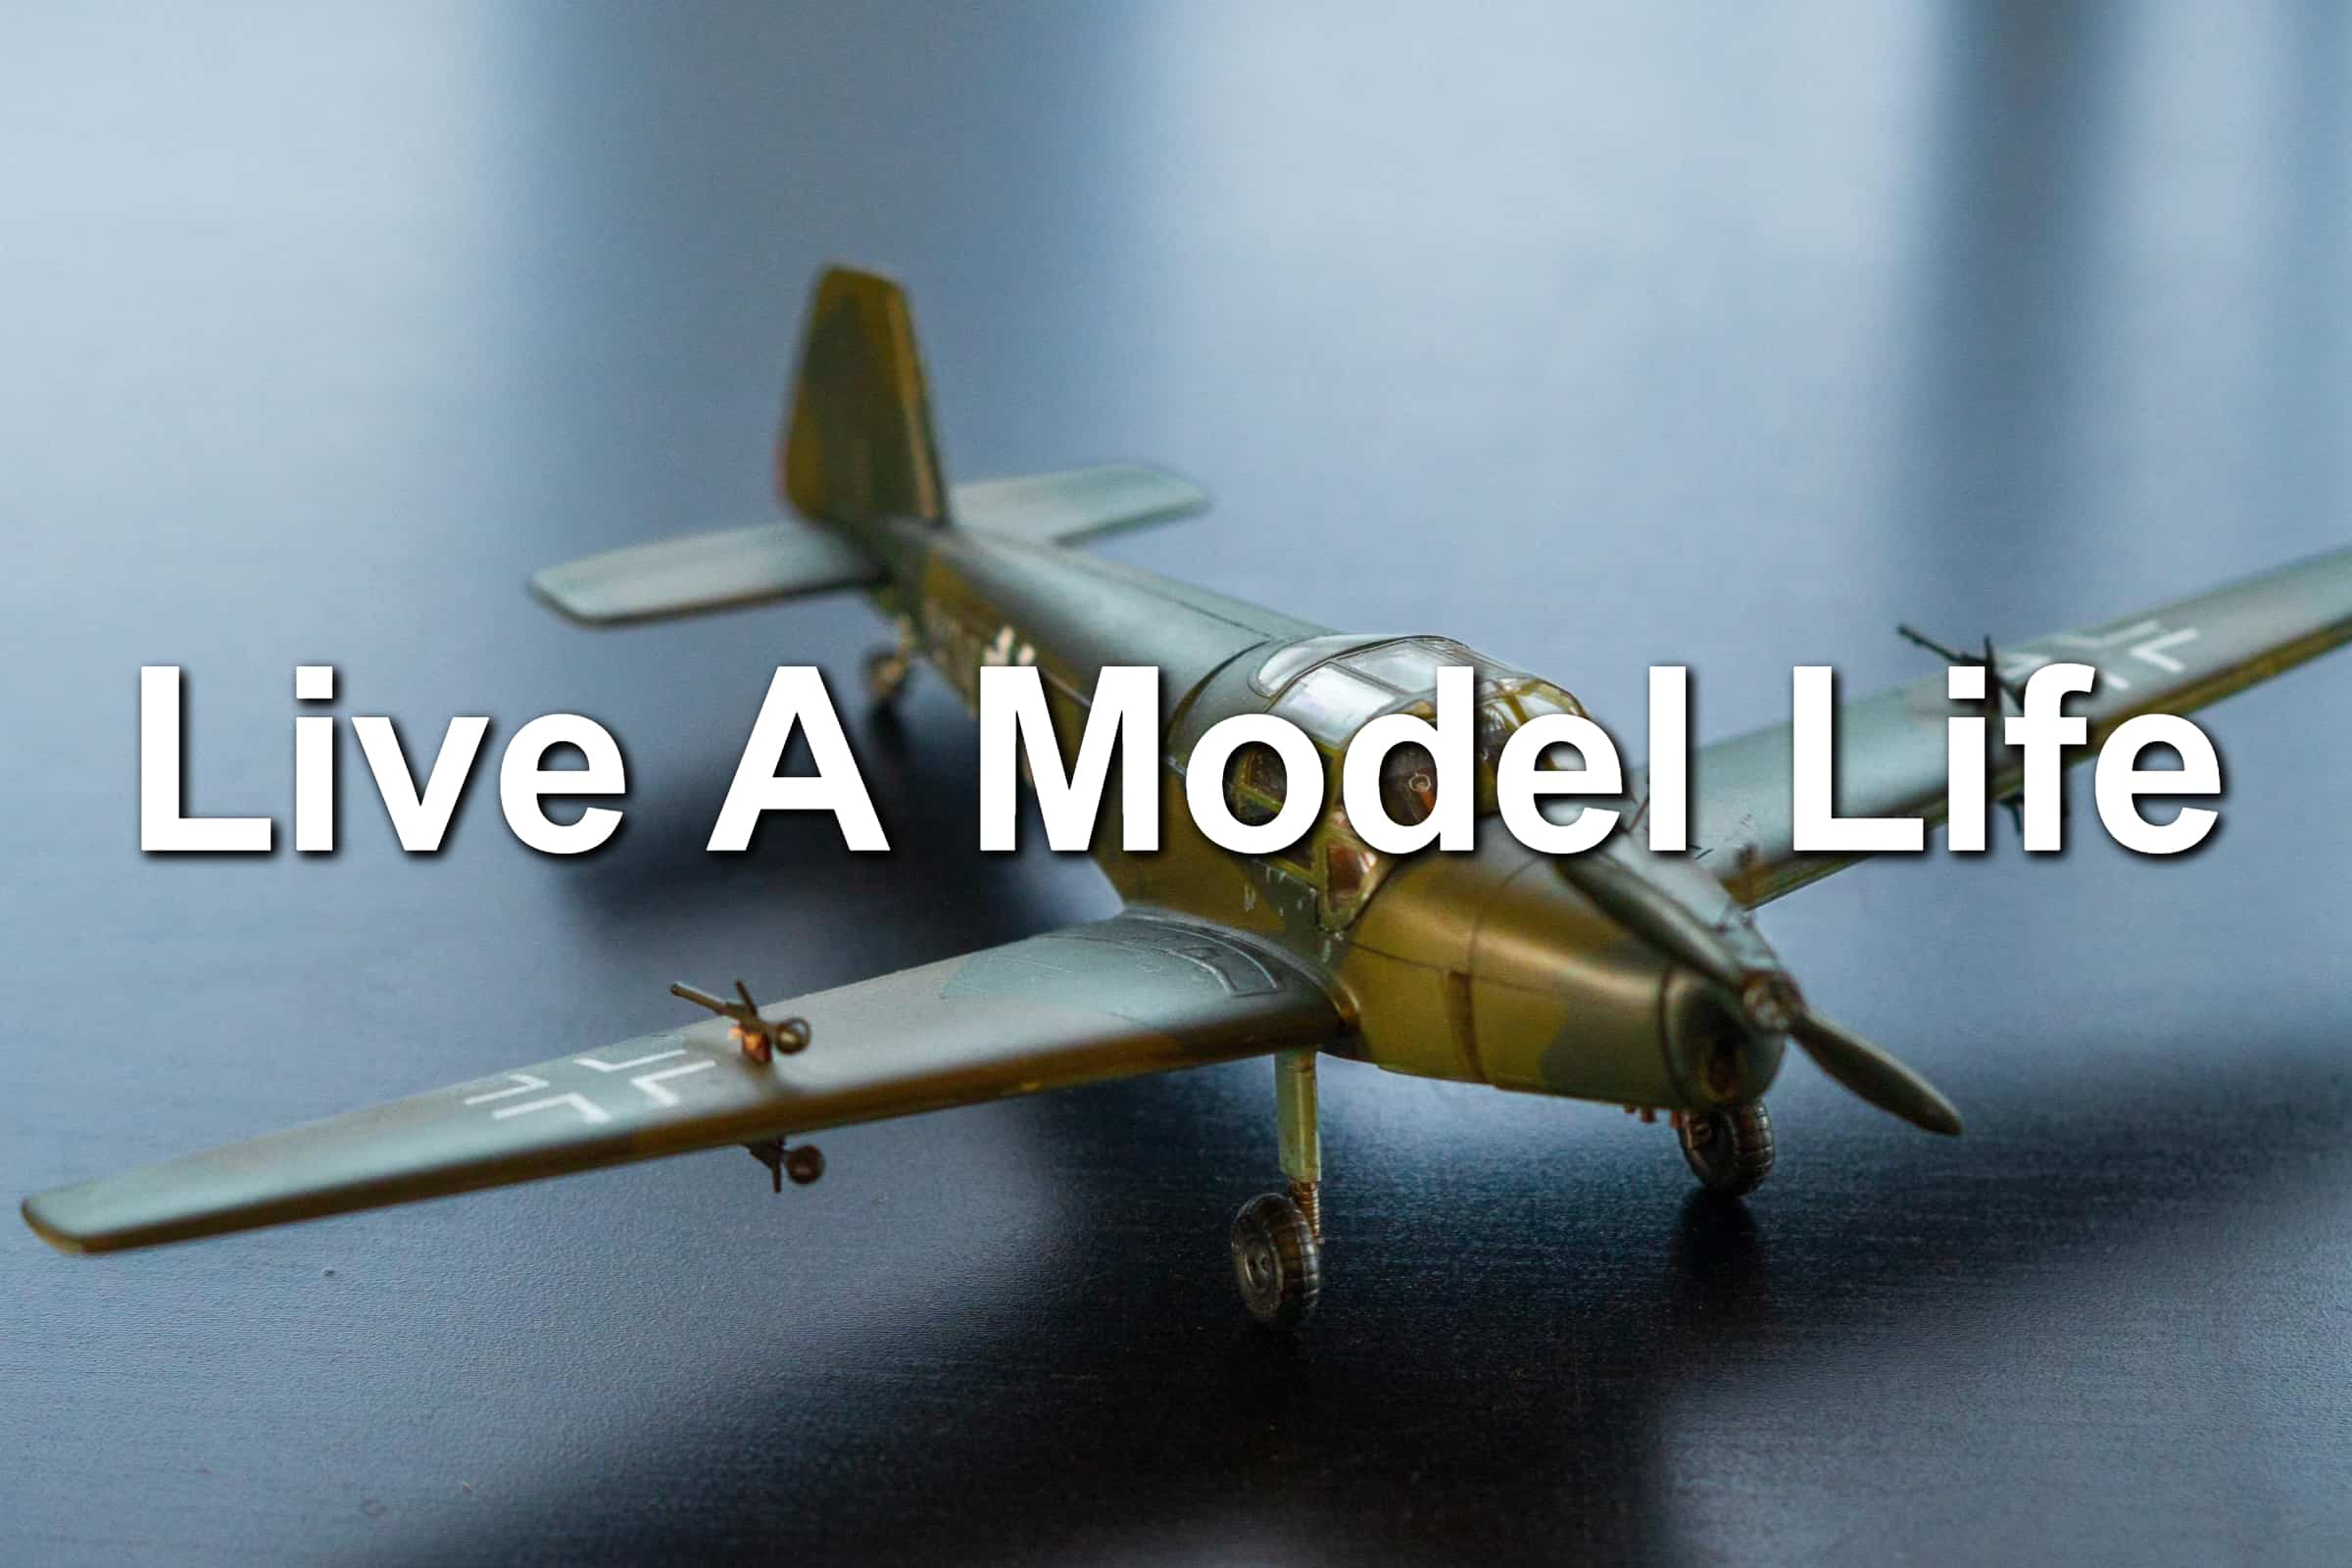 Model airplane sitting on a table